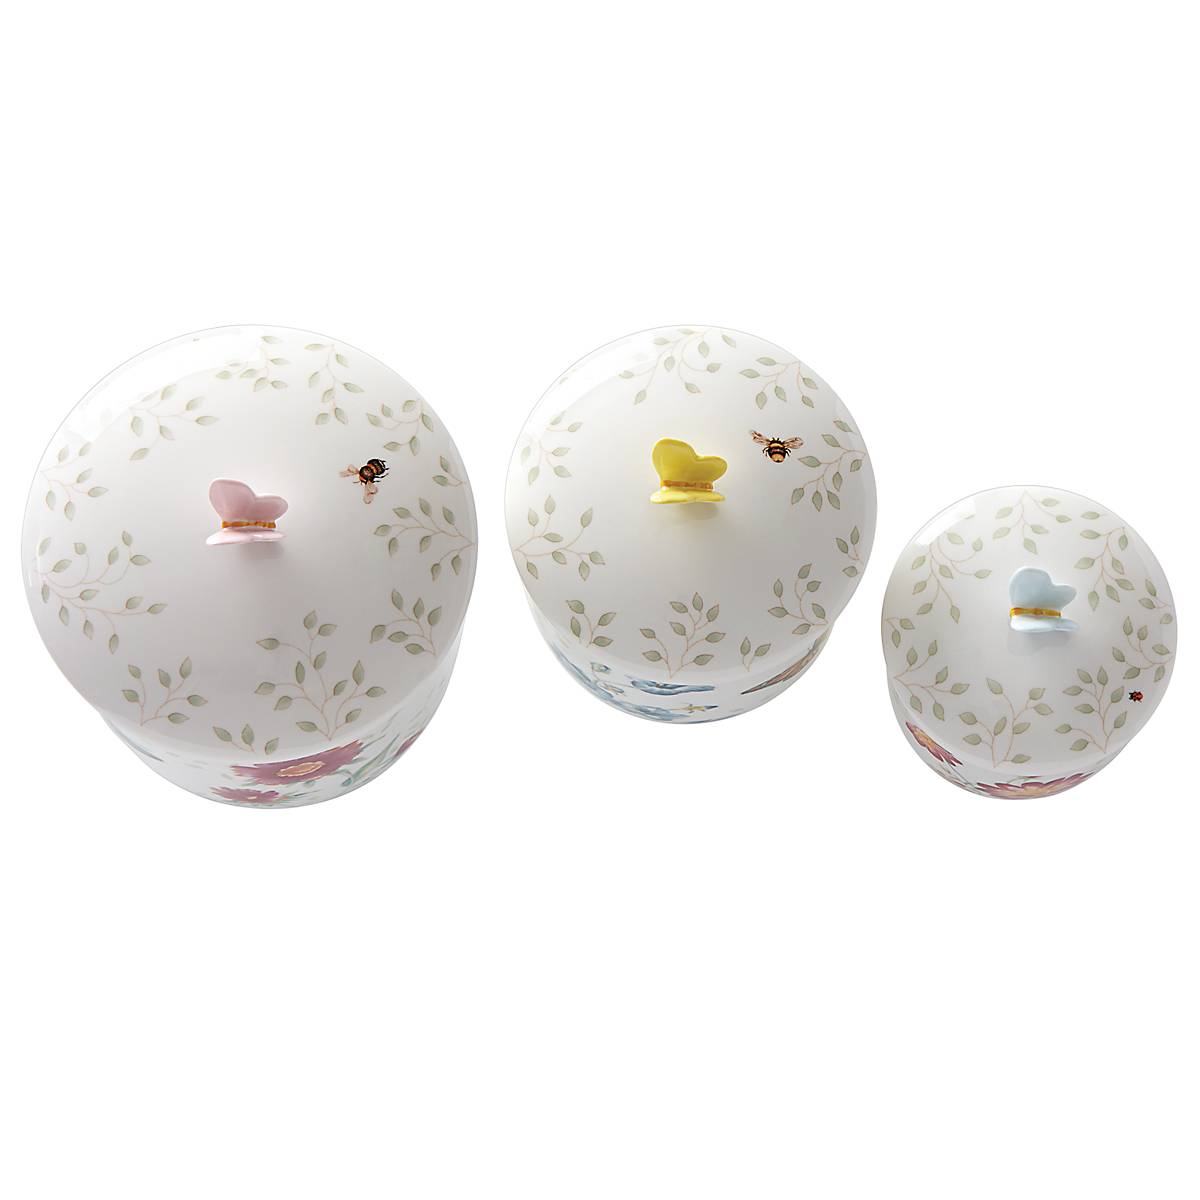 Butterfly Meadow 3-Piece Canister Set